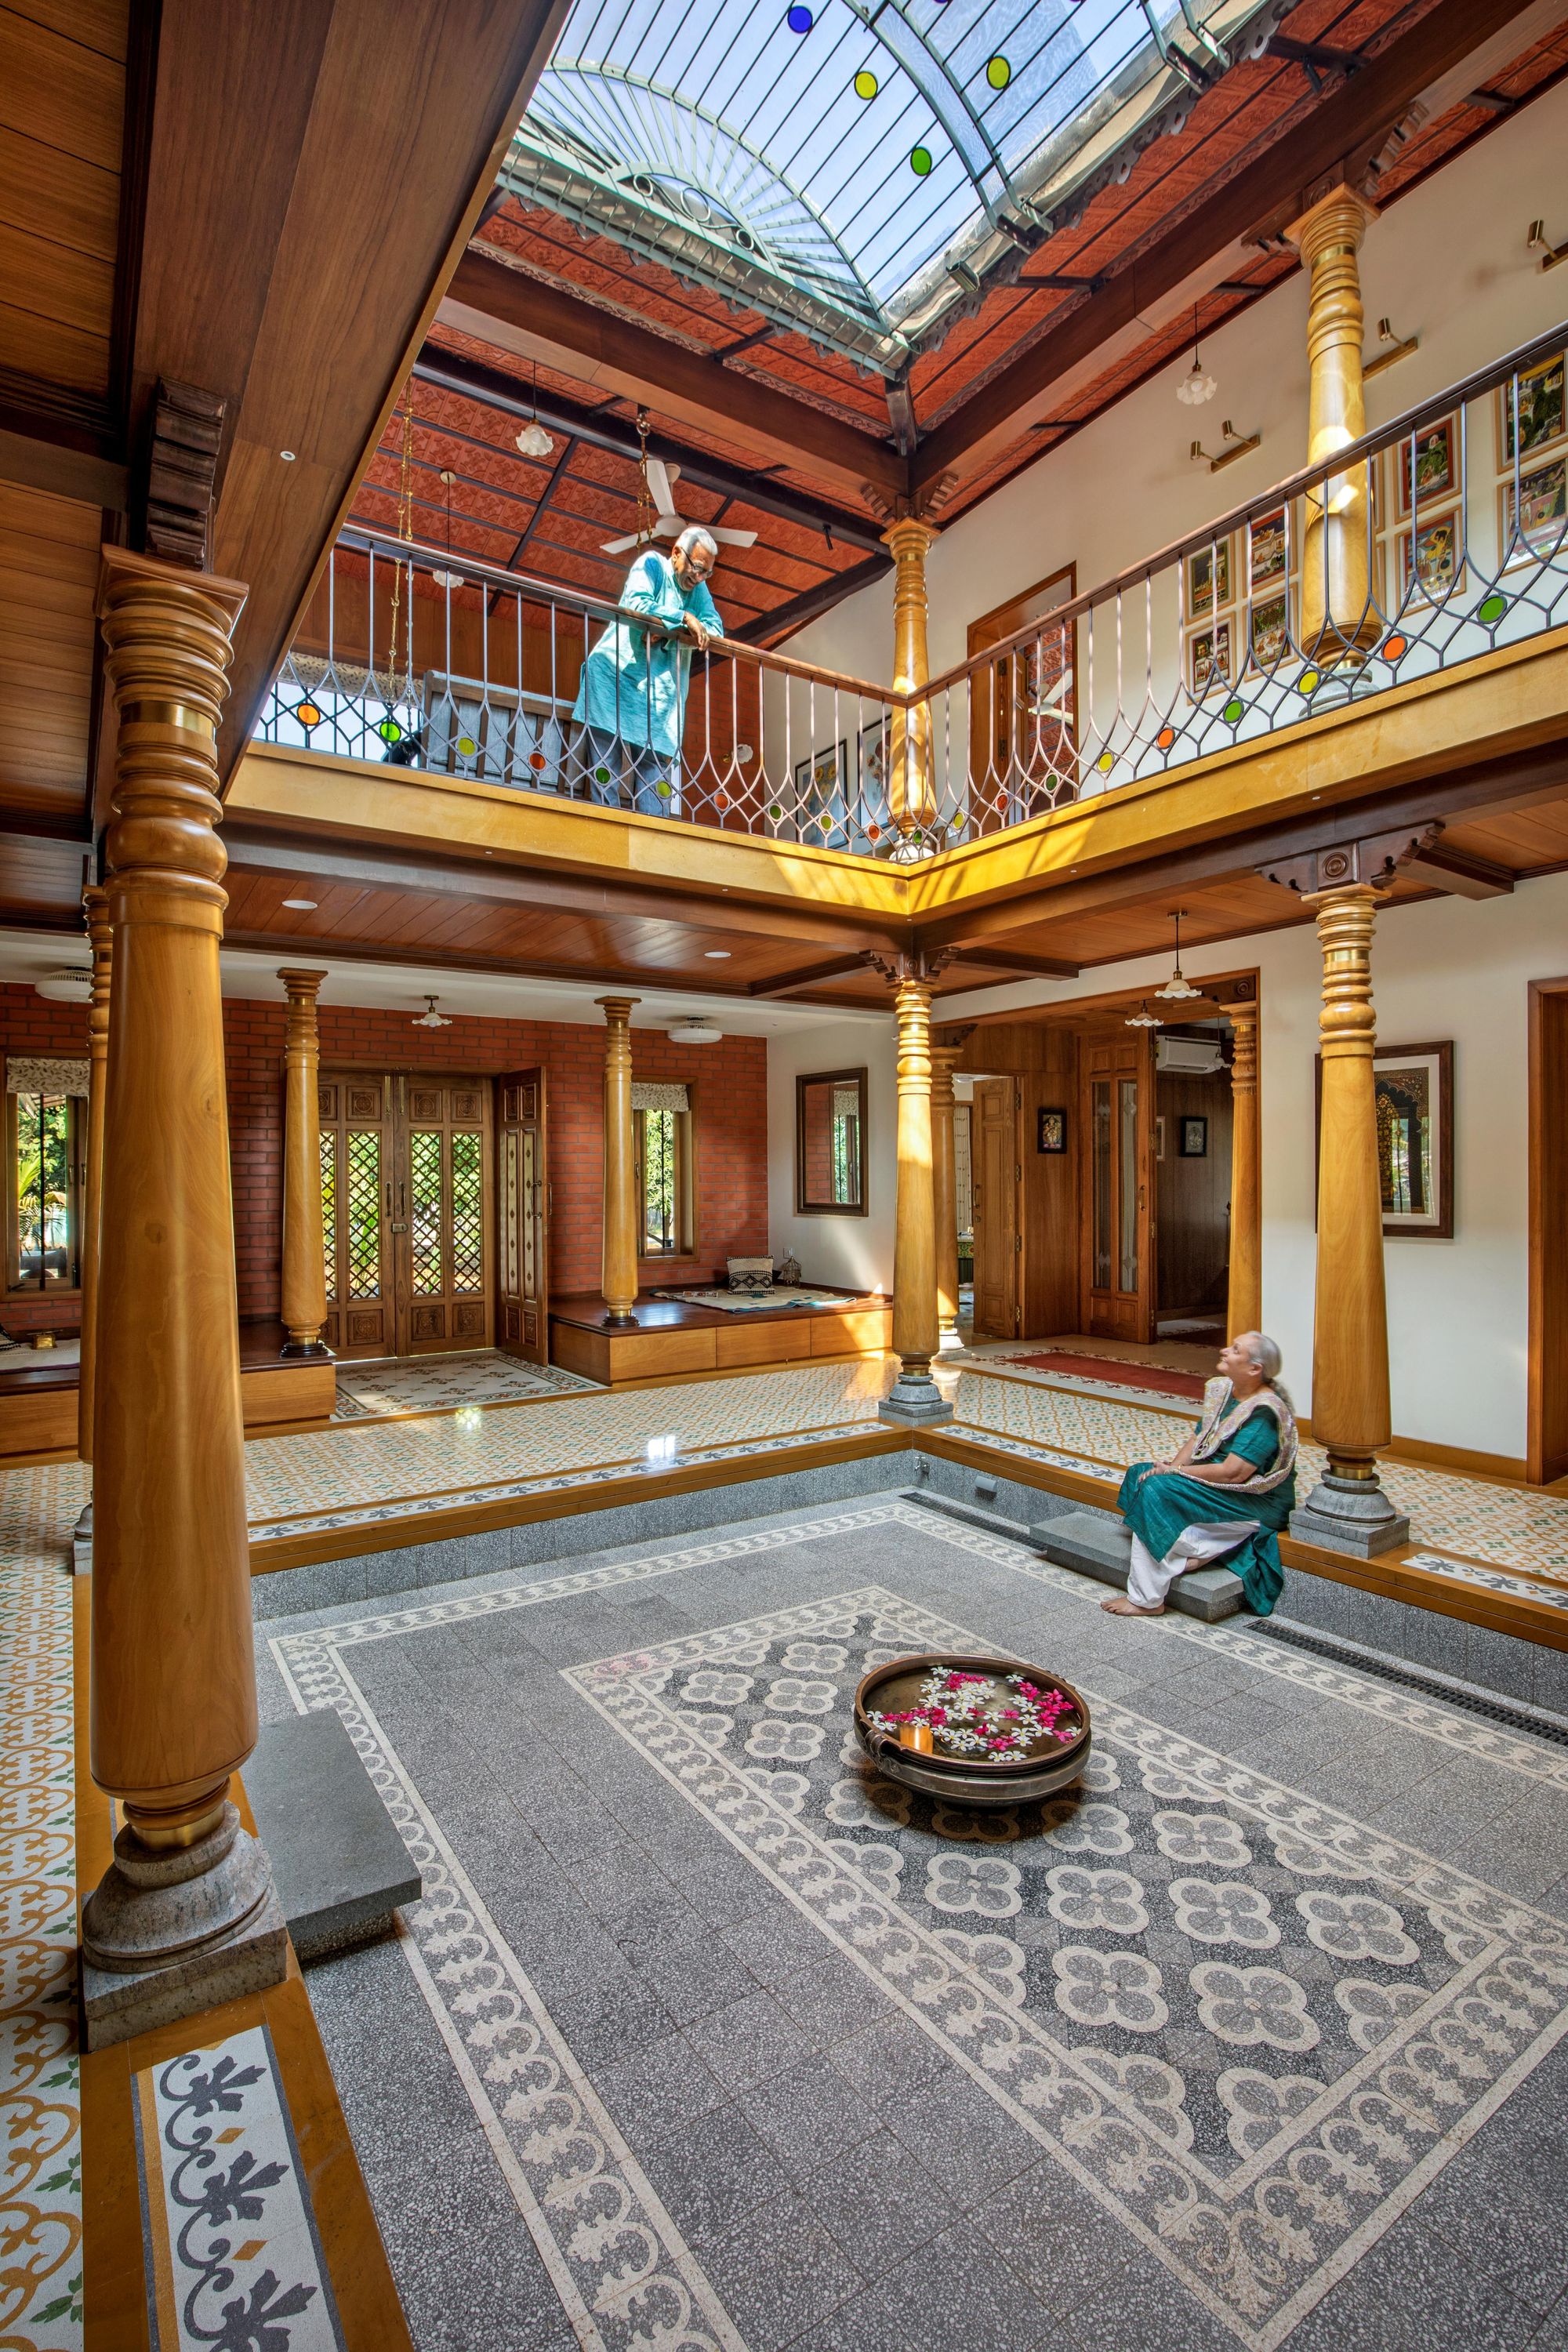 Gujarat Houzz: This Home Balances the Modern & the Traditional